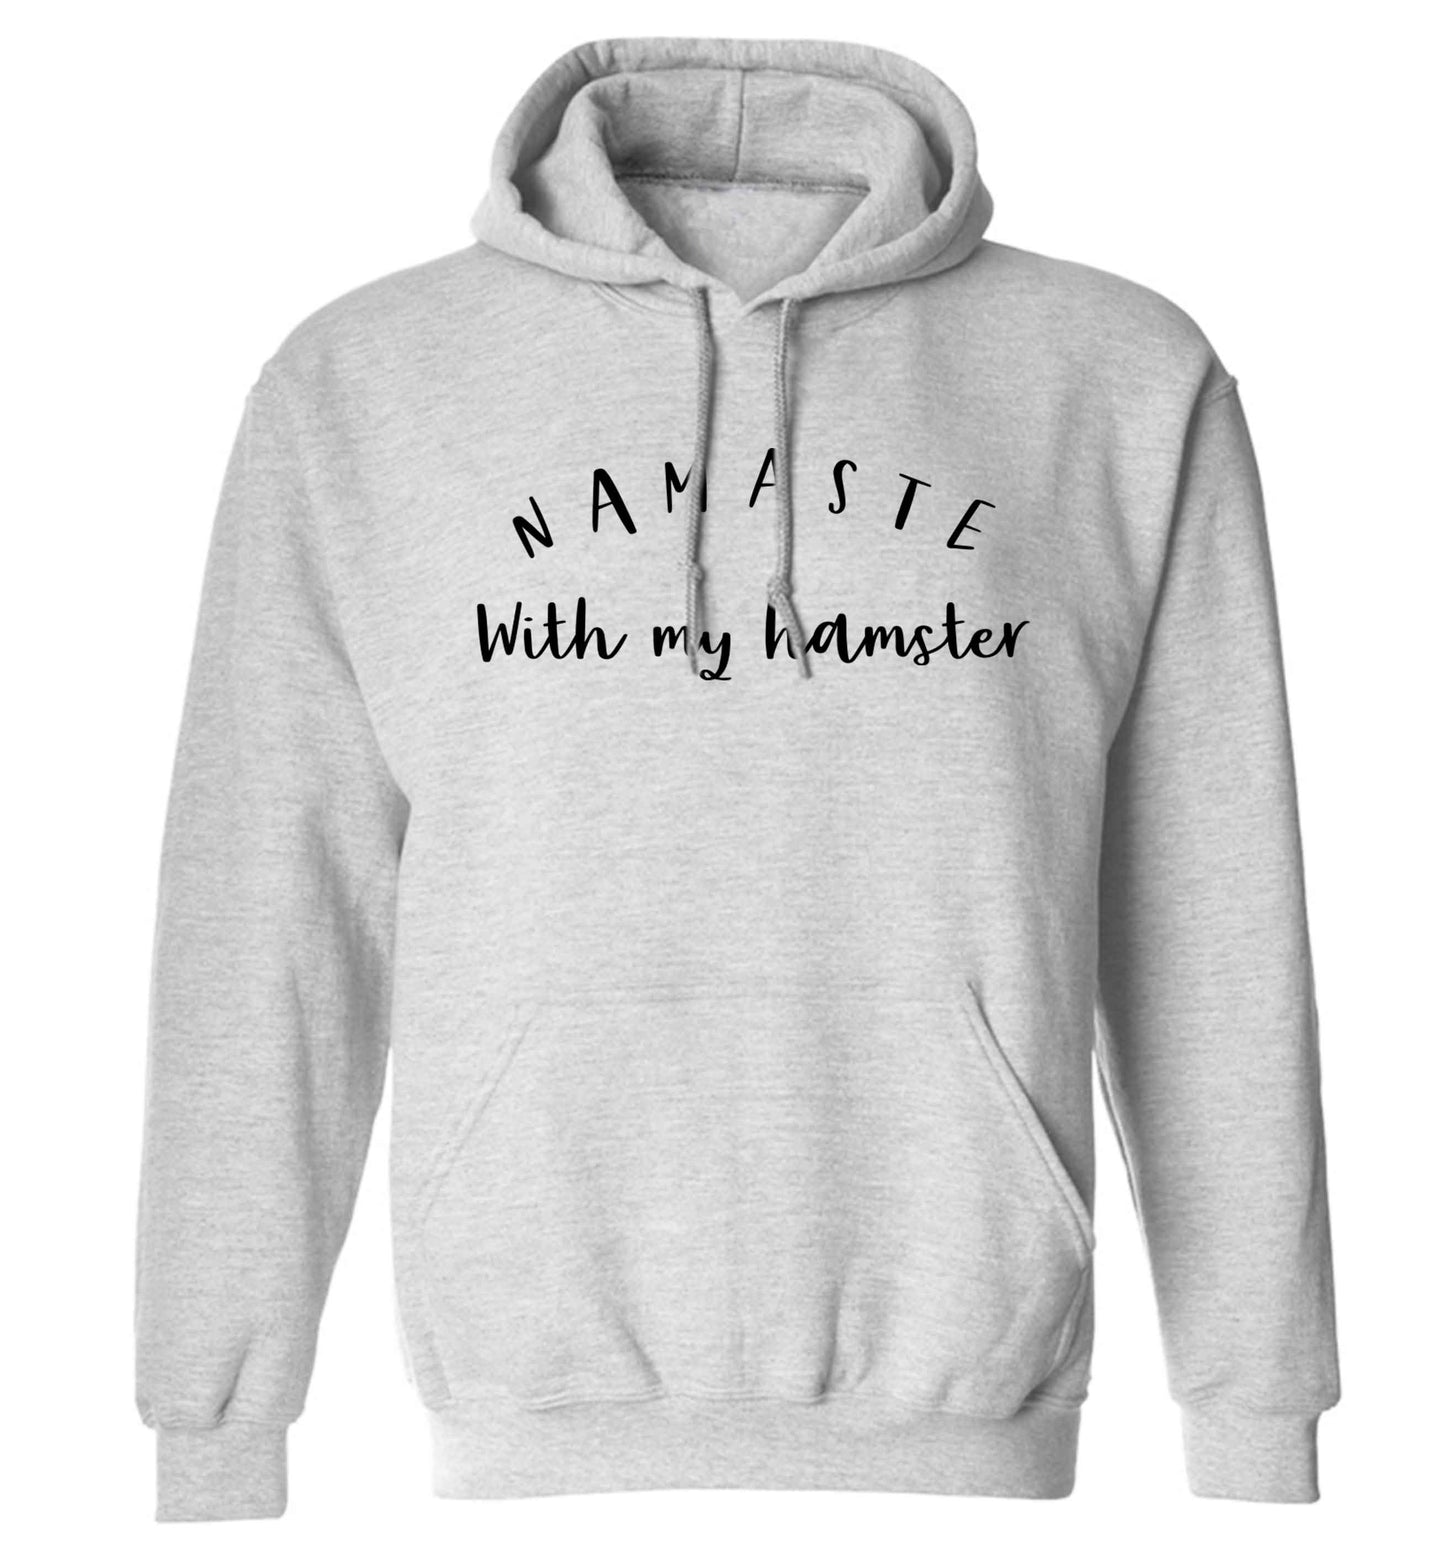 Namaste with my hamster adults unisex grey hoodie 2XL